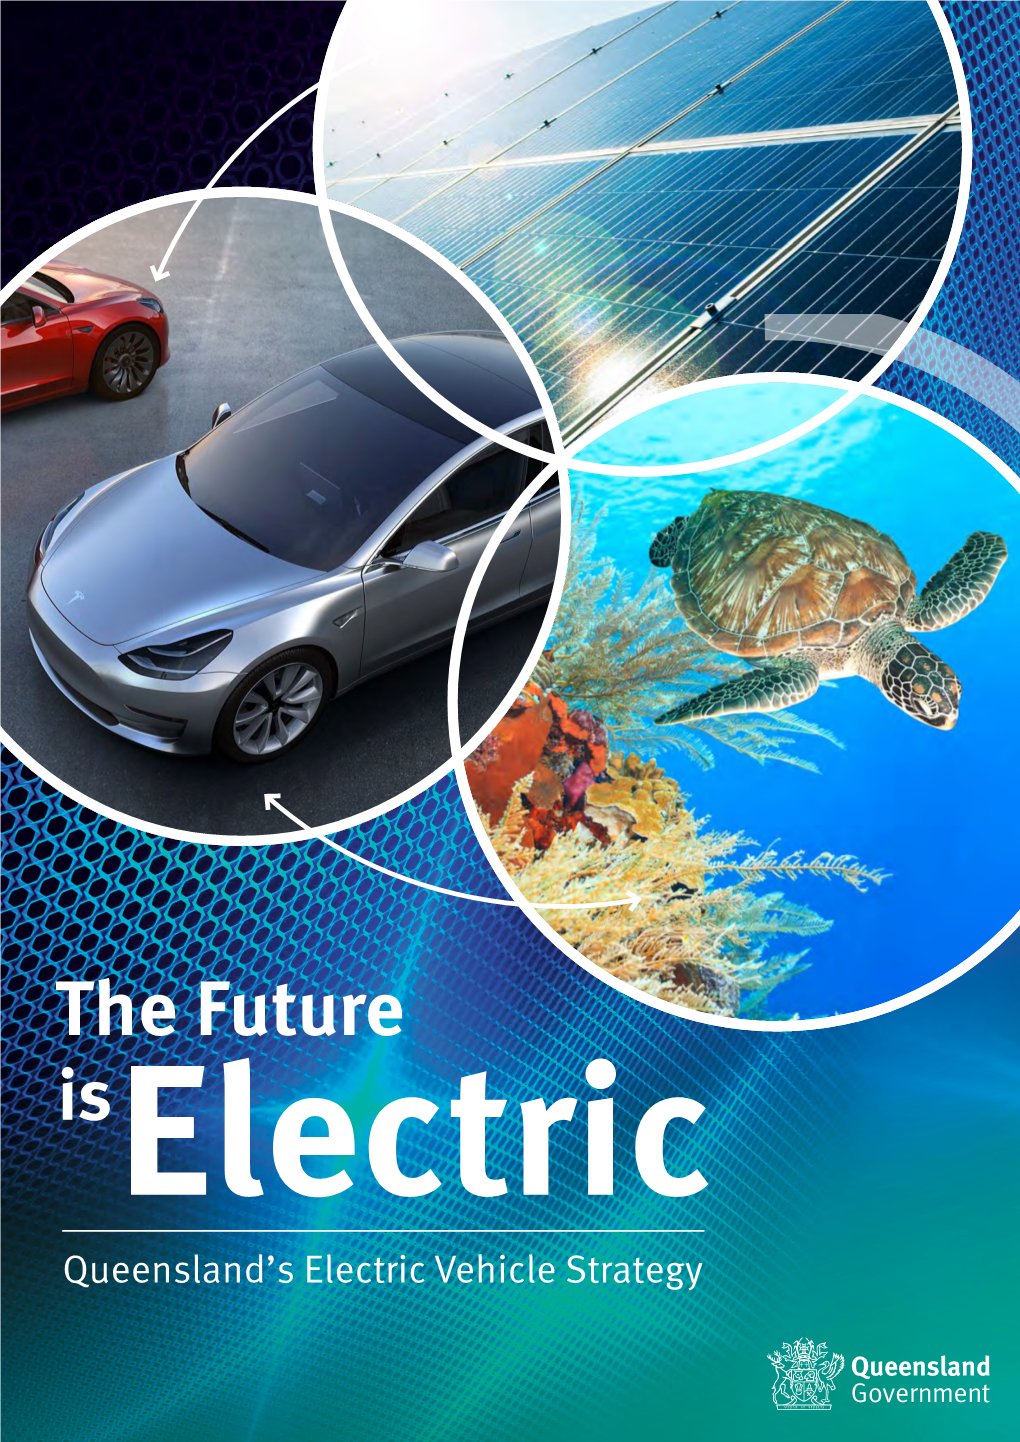 Queensland's Electric Vehicle Strategy